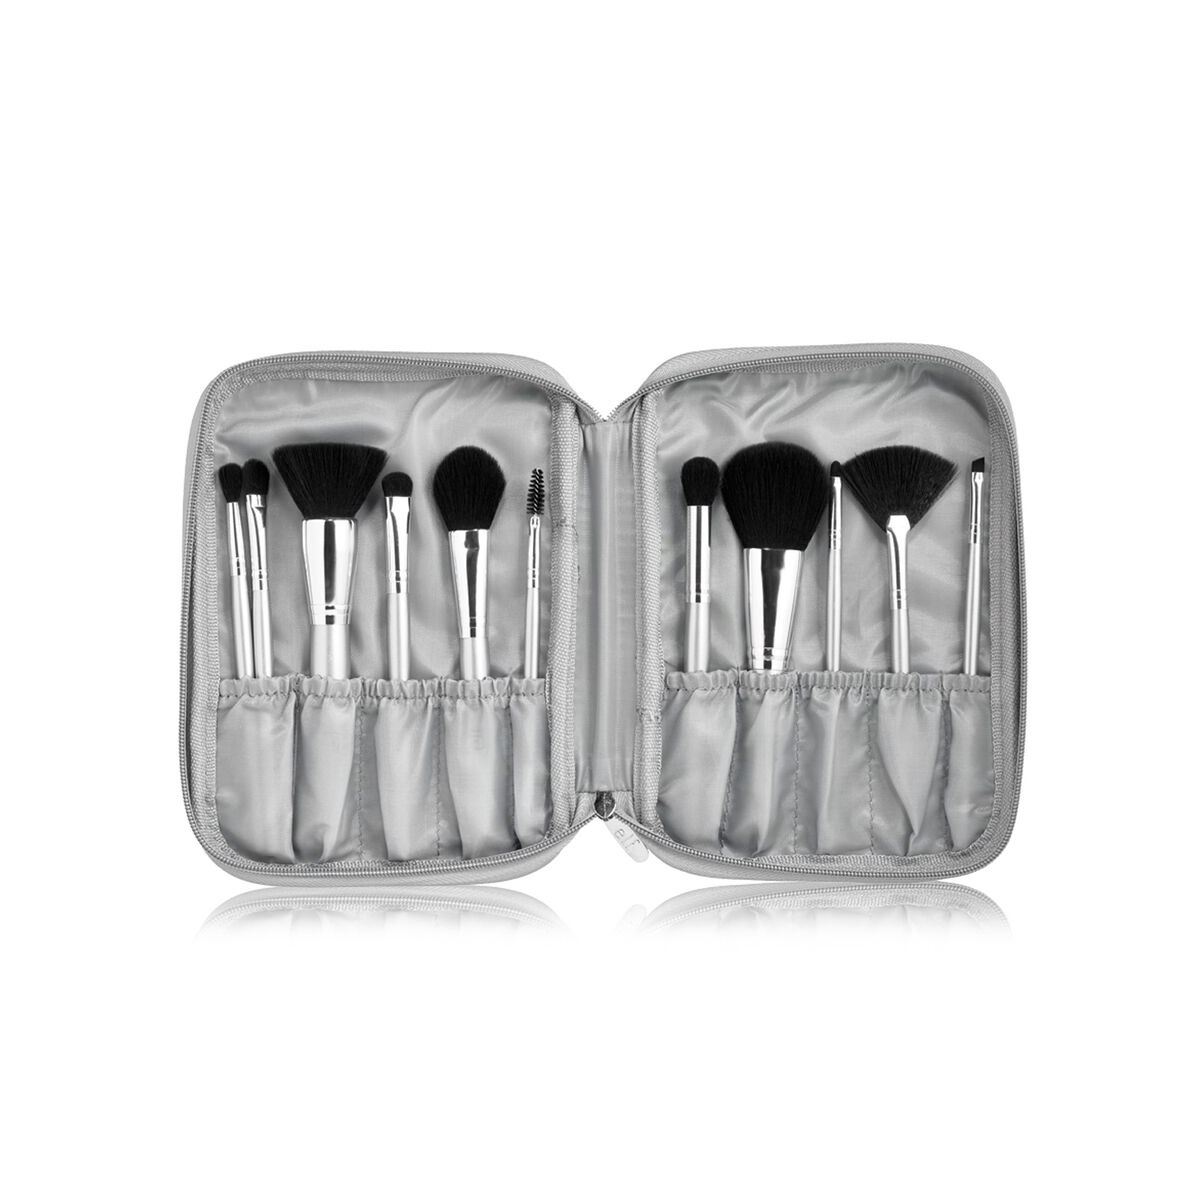 Brush kit with silver handles &#45; 11 piece